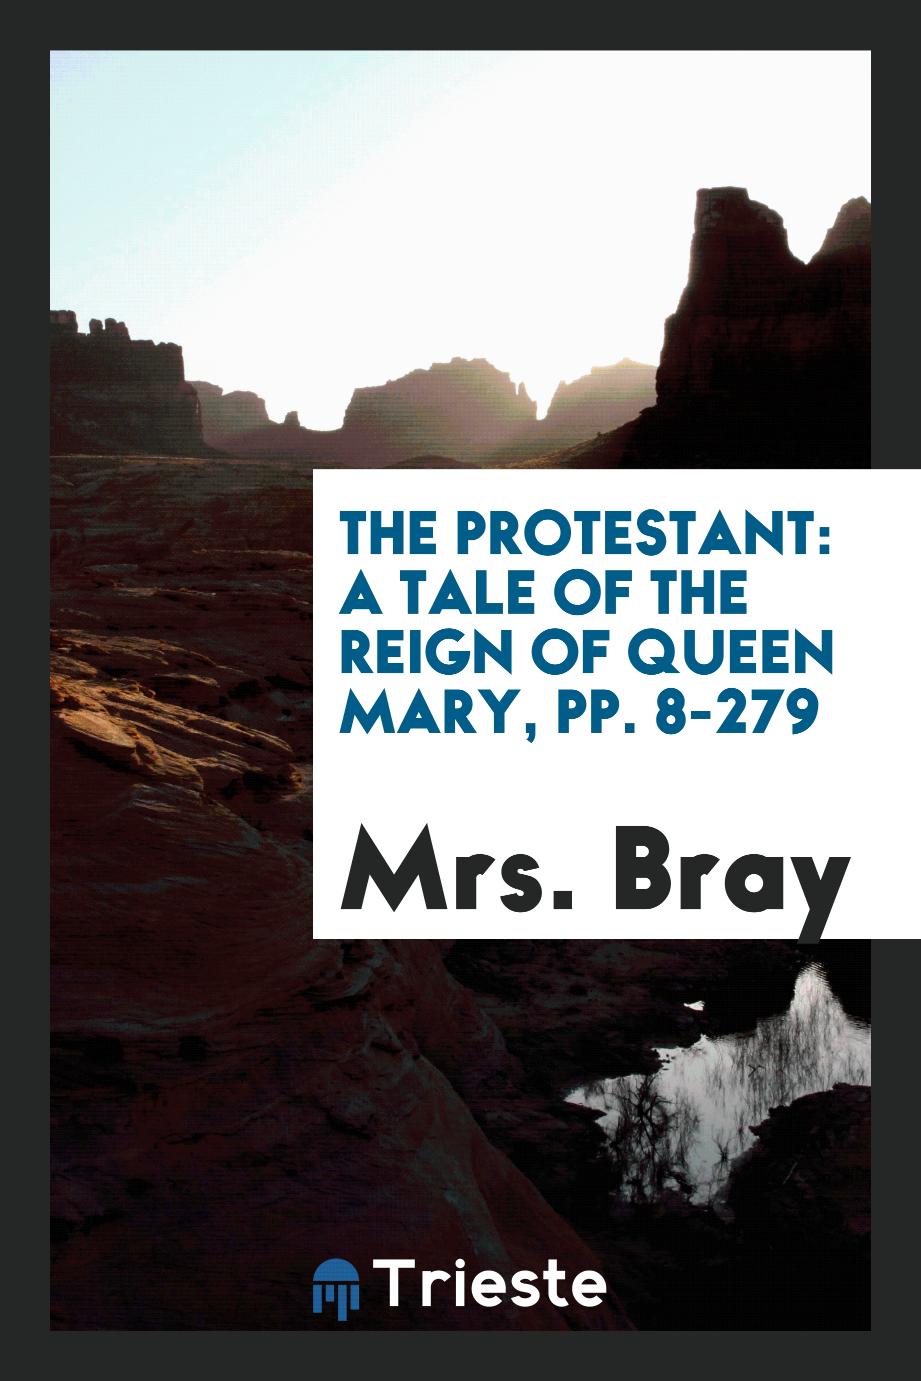 The Protestant: A Tale of the Reign of Queen Mary, pp. 8-279